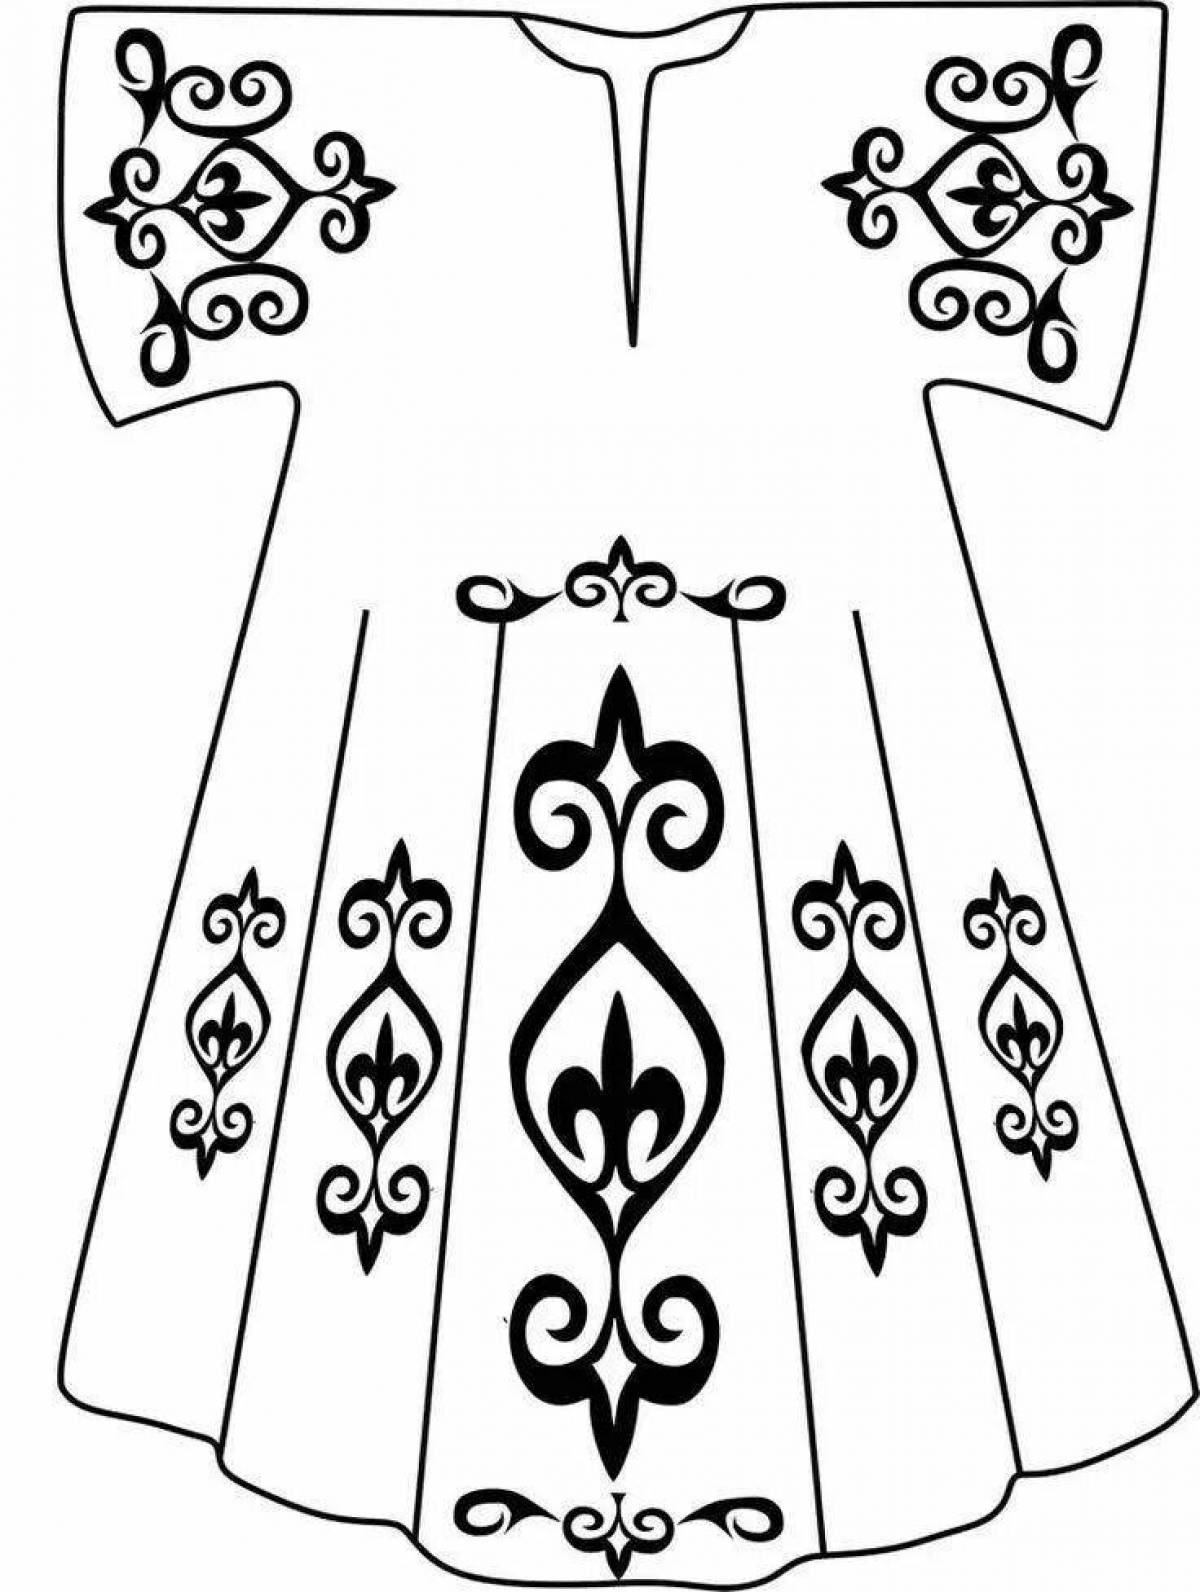 Coloring page inviting Kazakh national costume